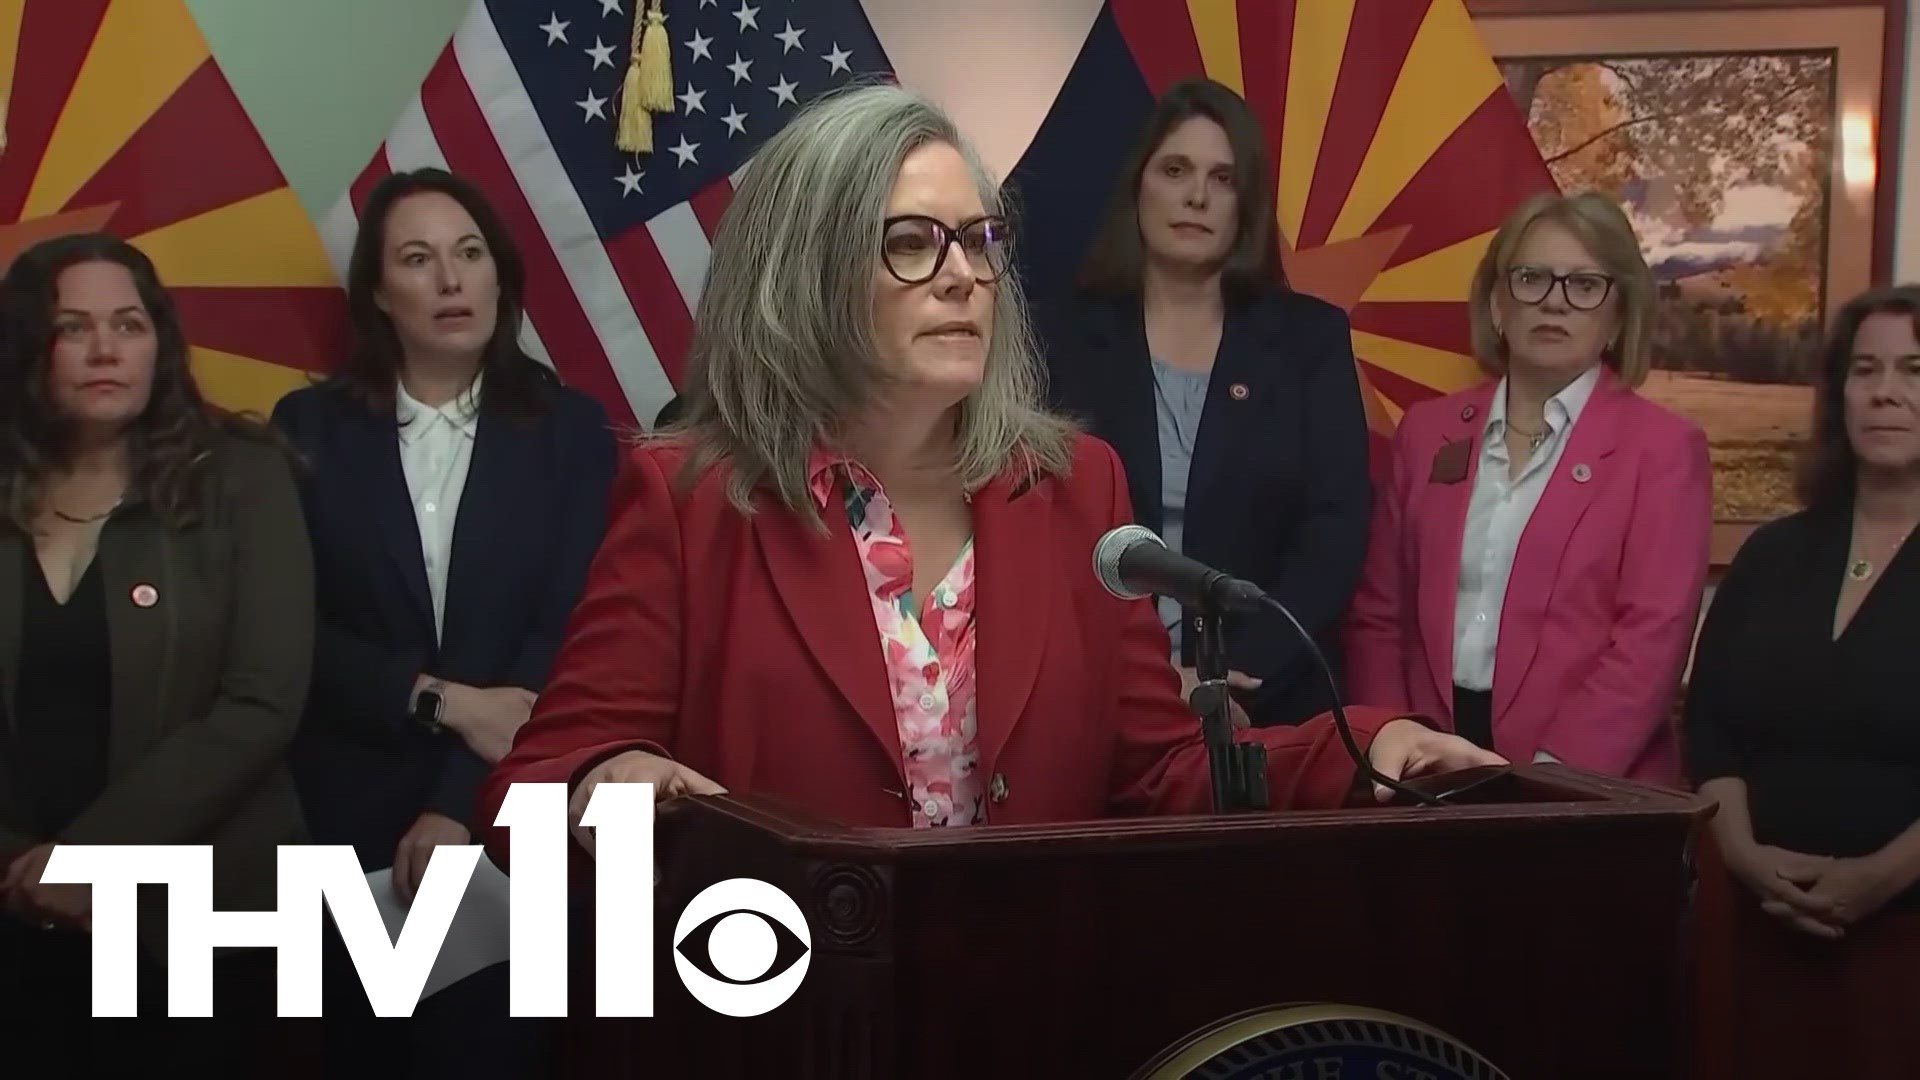 Arizona figured to be a battleground state in the presidential race. The state supreme court there added the issue of abortion to the campaign debates on Tuesday.